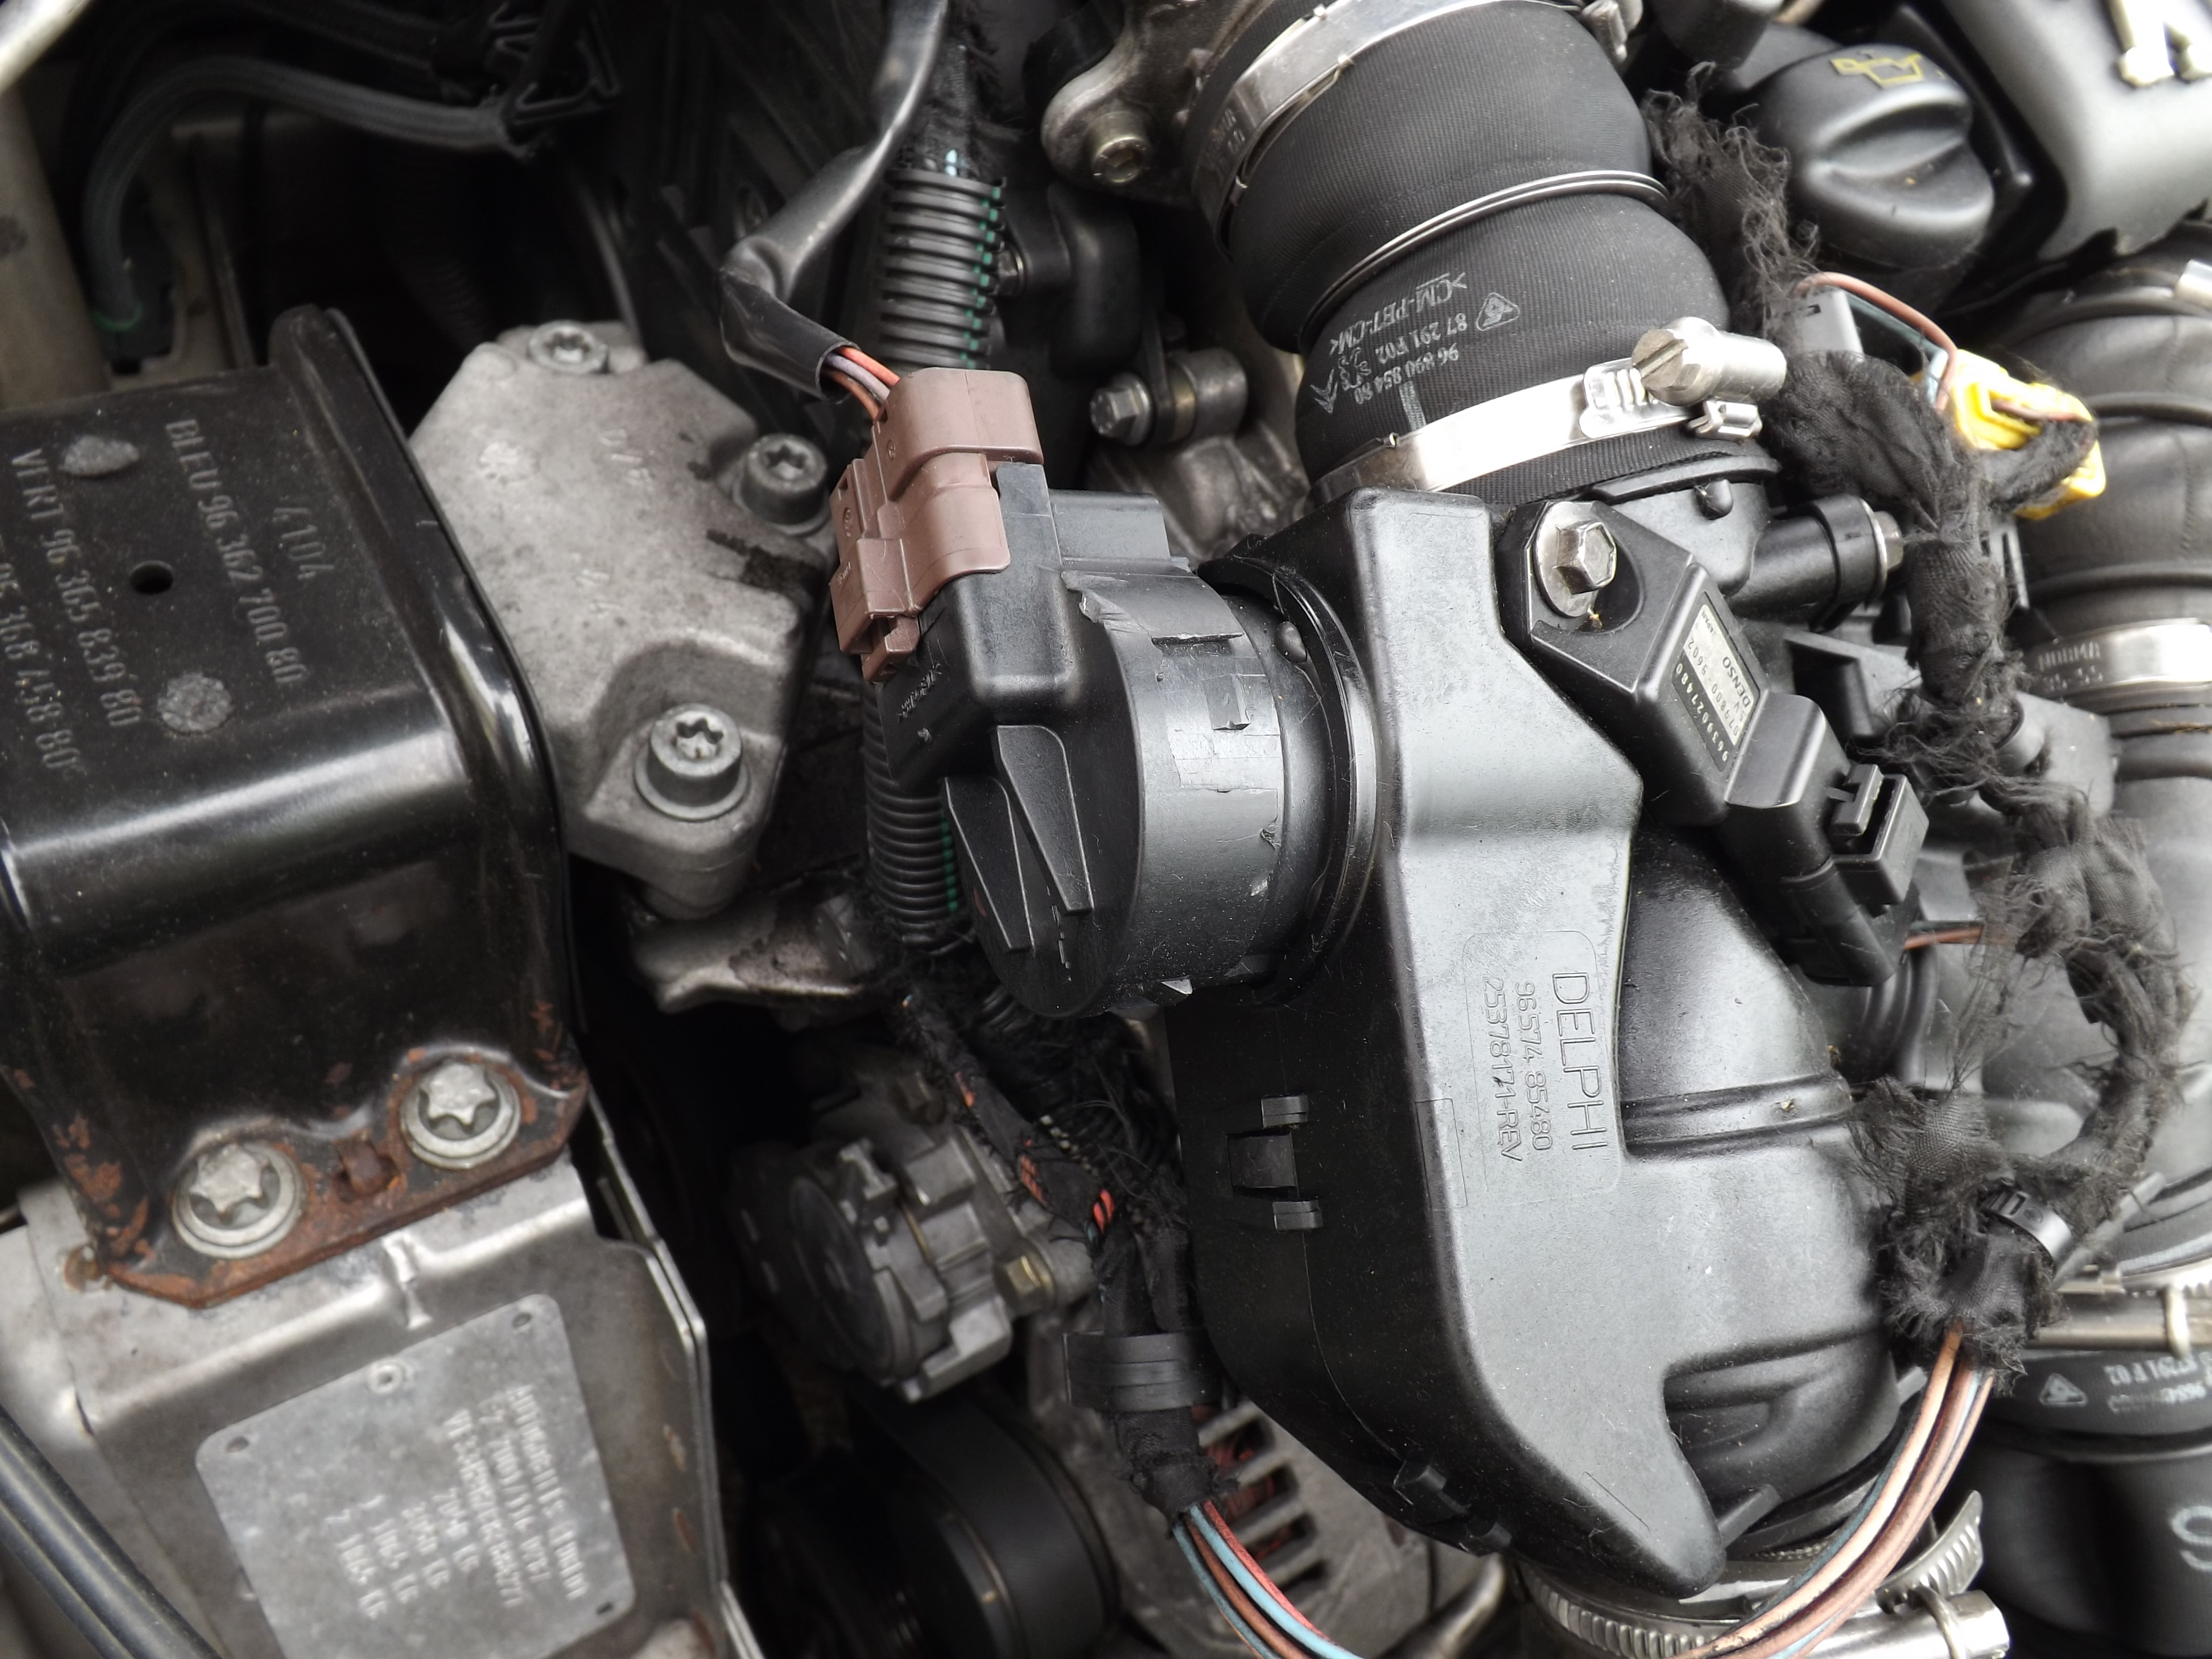 307 1.6 Hdi Antipollution Fault And Broken Connector | Peugeot Forums